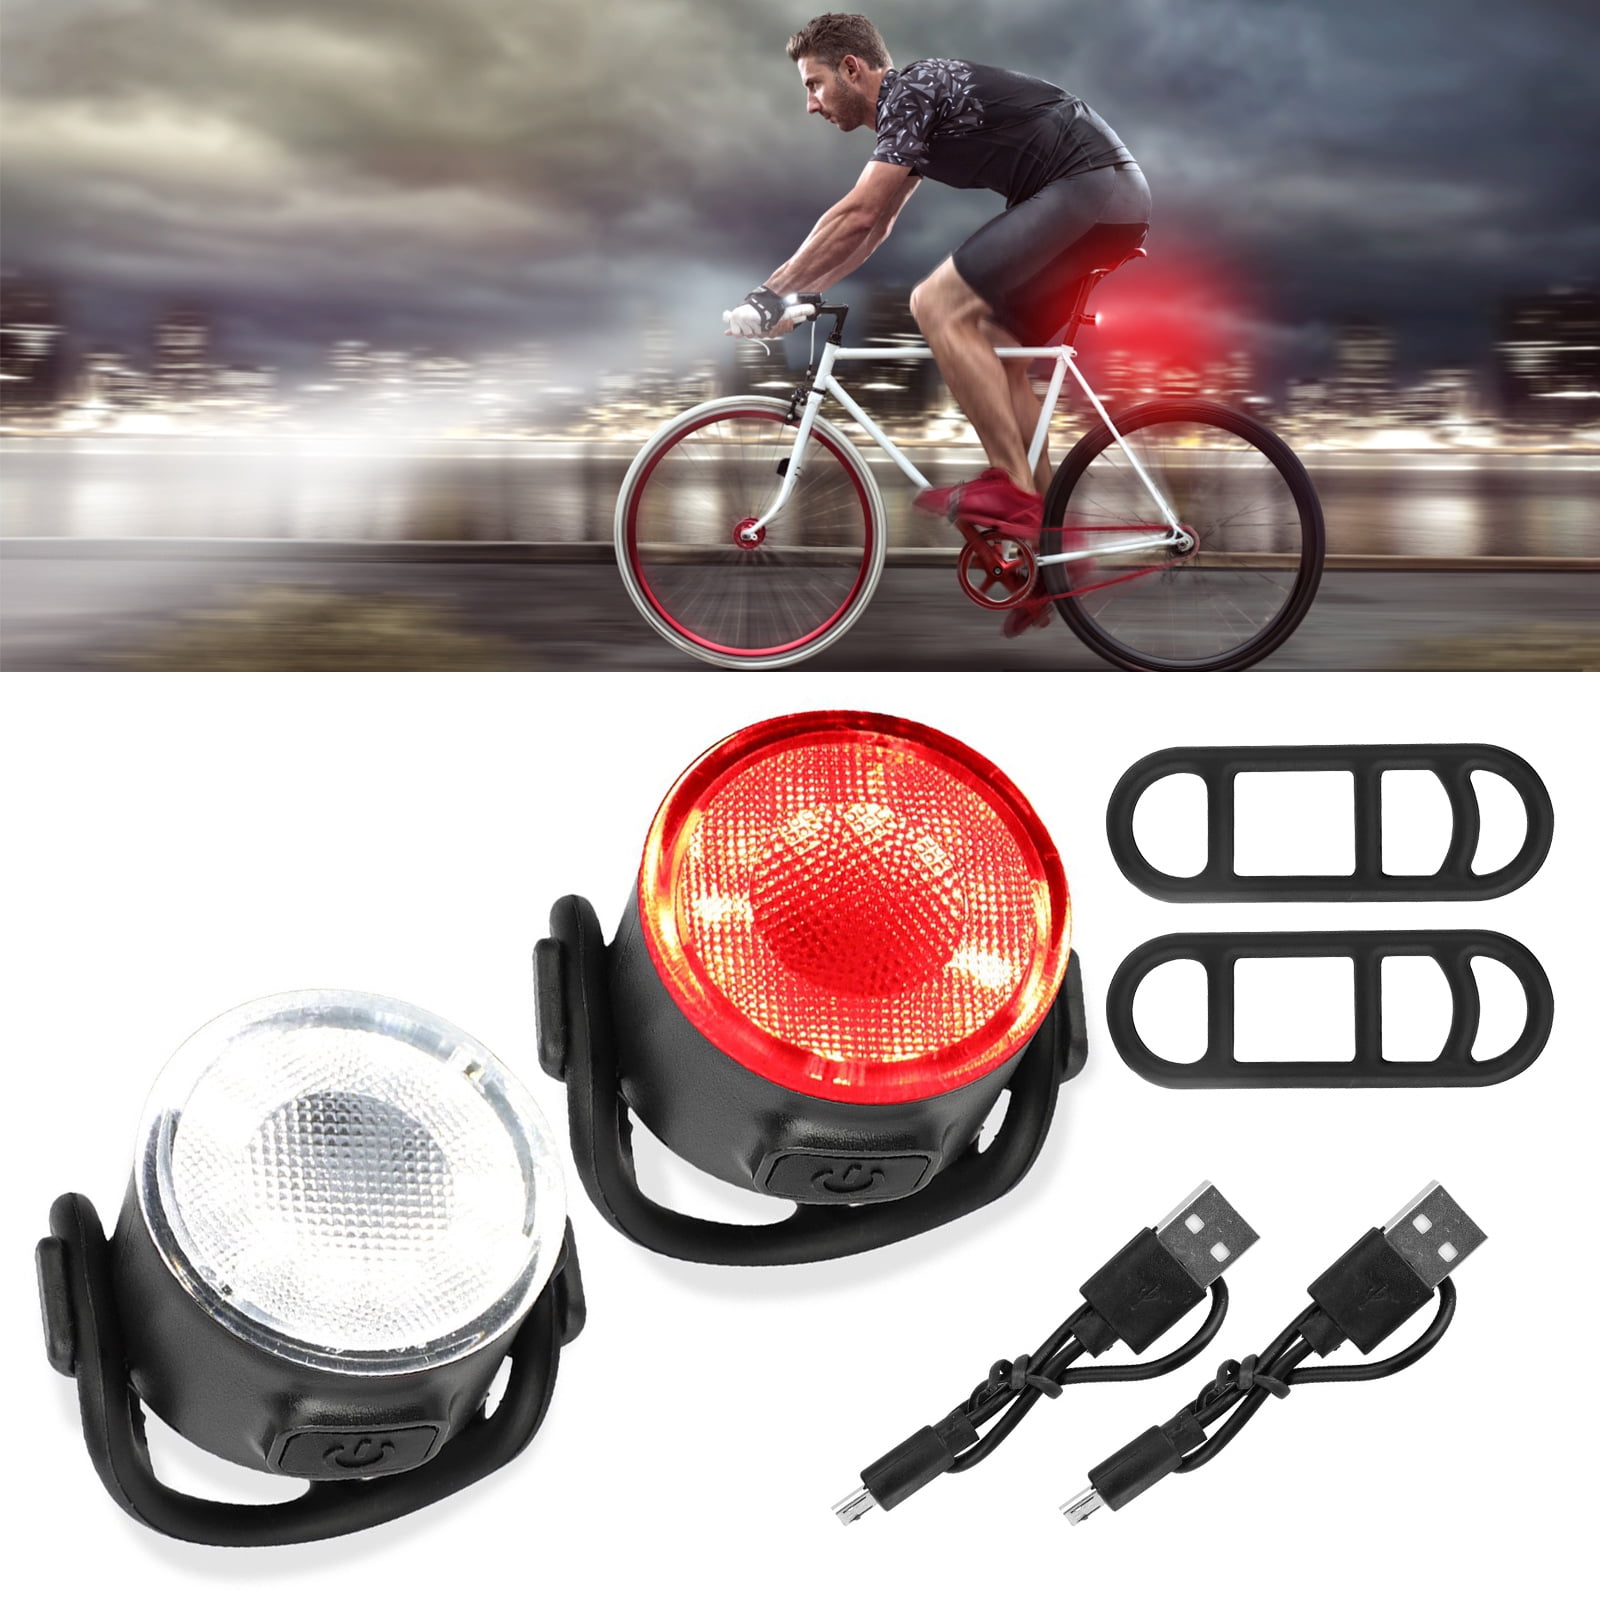 IPX4 Waterproof Suitable for All Bicycles and All Kinds of Roads 6 Brightness Modes with on/Off Memory Function White Headlights and red rearlights Bike Light Set USB Charging 